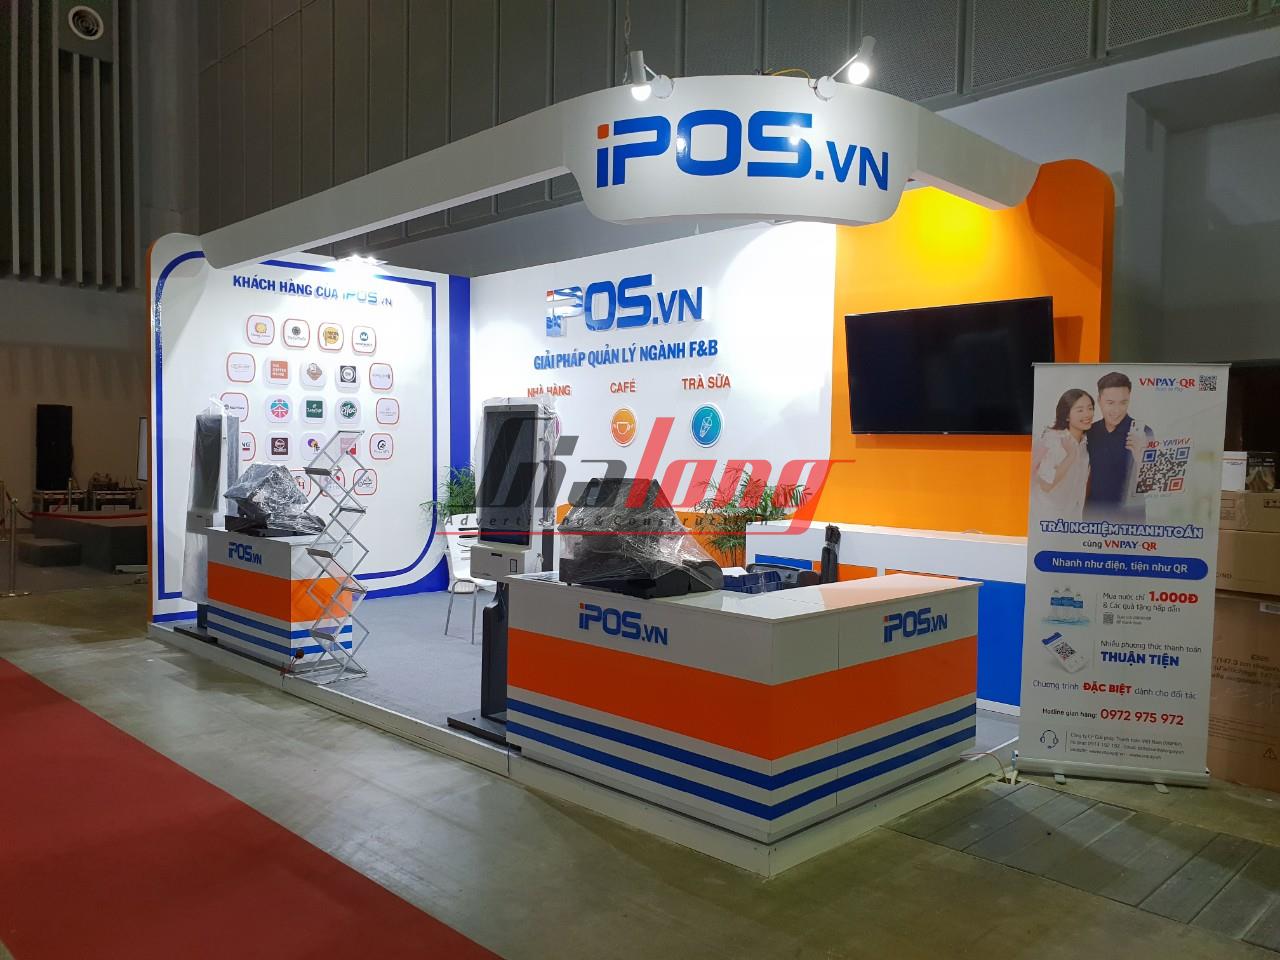 The booth displayed at the trade fair exhibition - Vietnam Int'l Tea Show